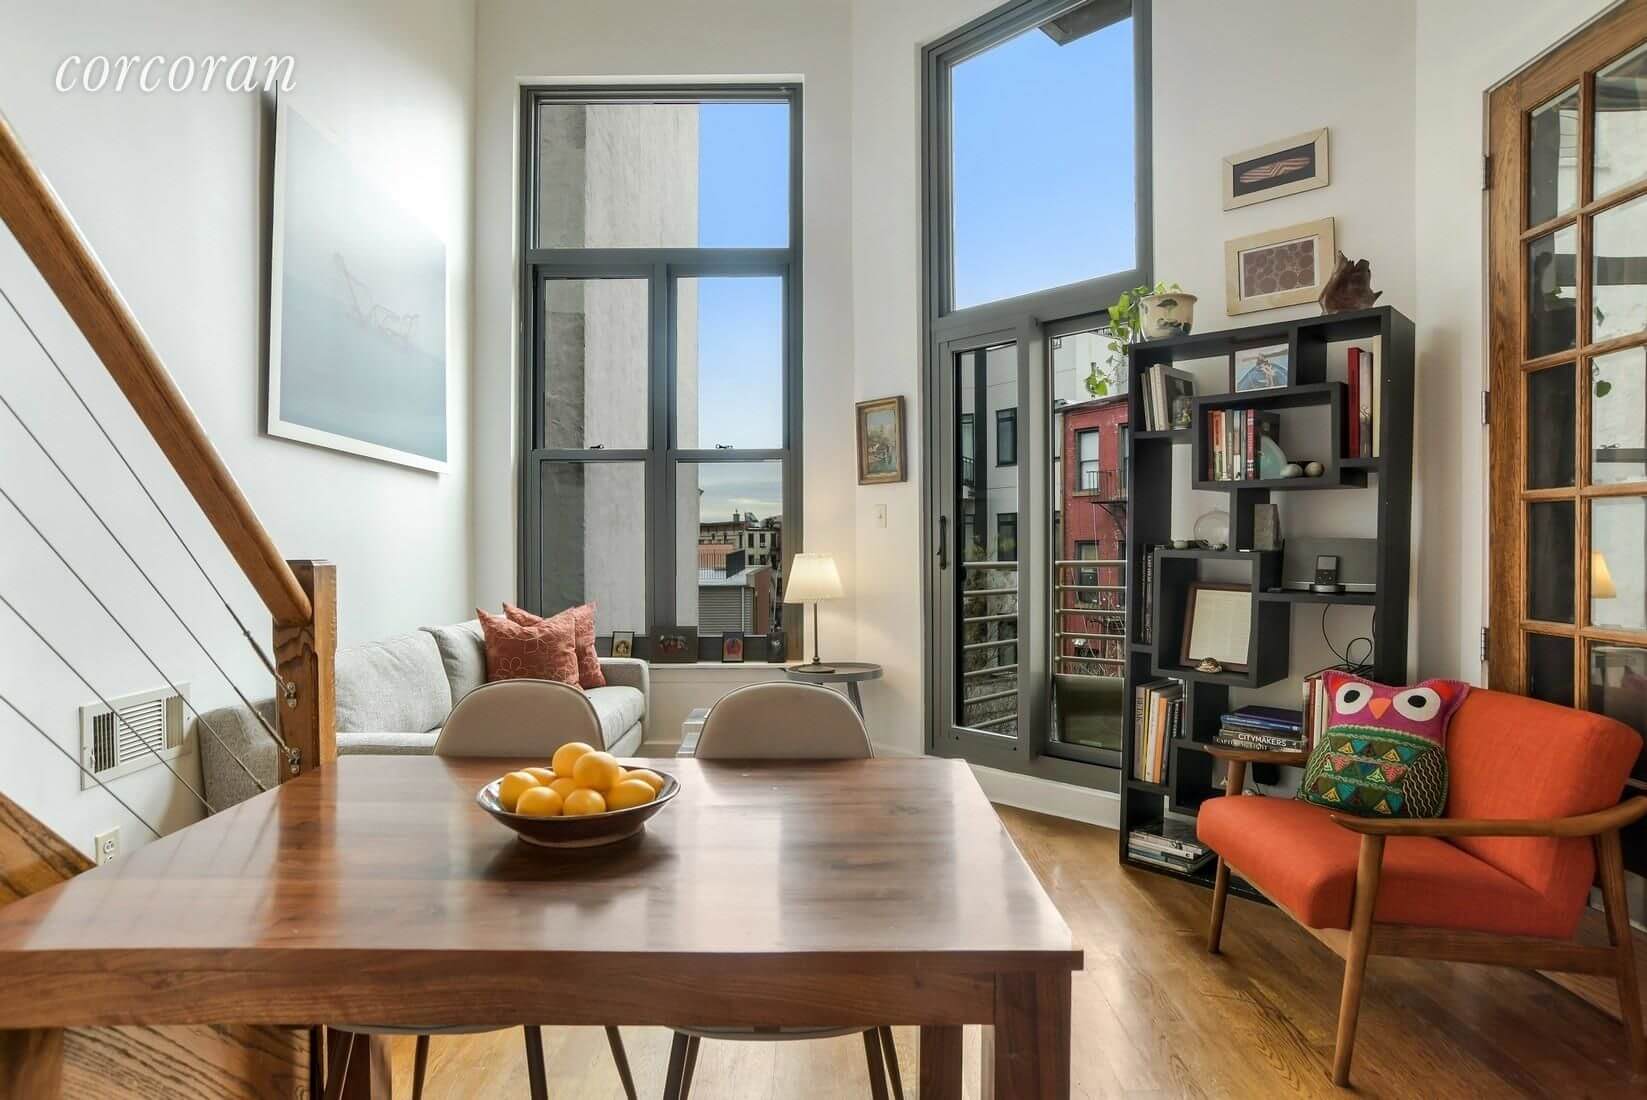 Brooklyn Apartments for Sale in Williamsburg at 395 S. 2nd Street